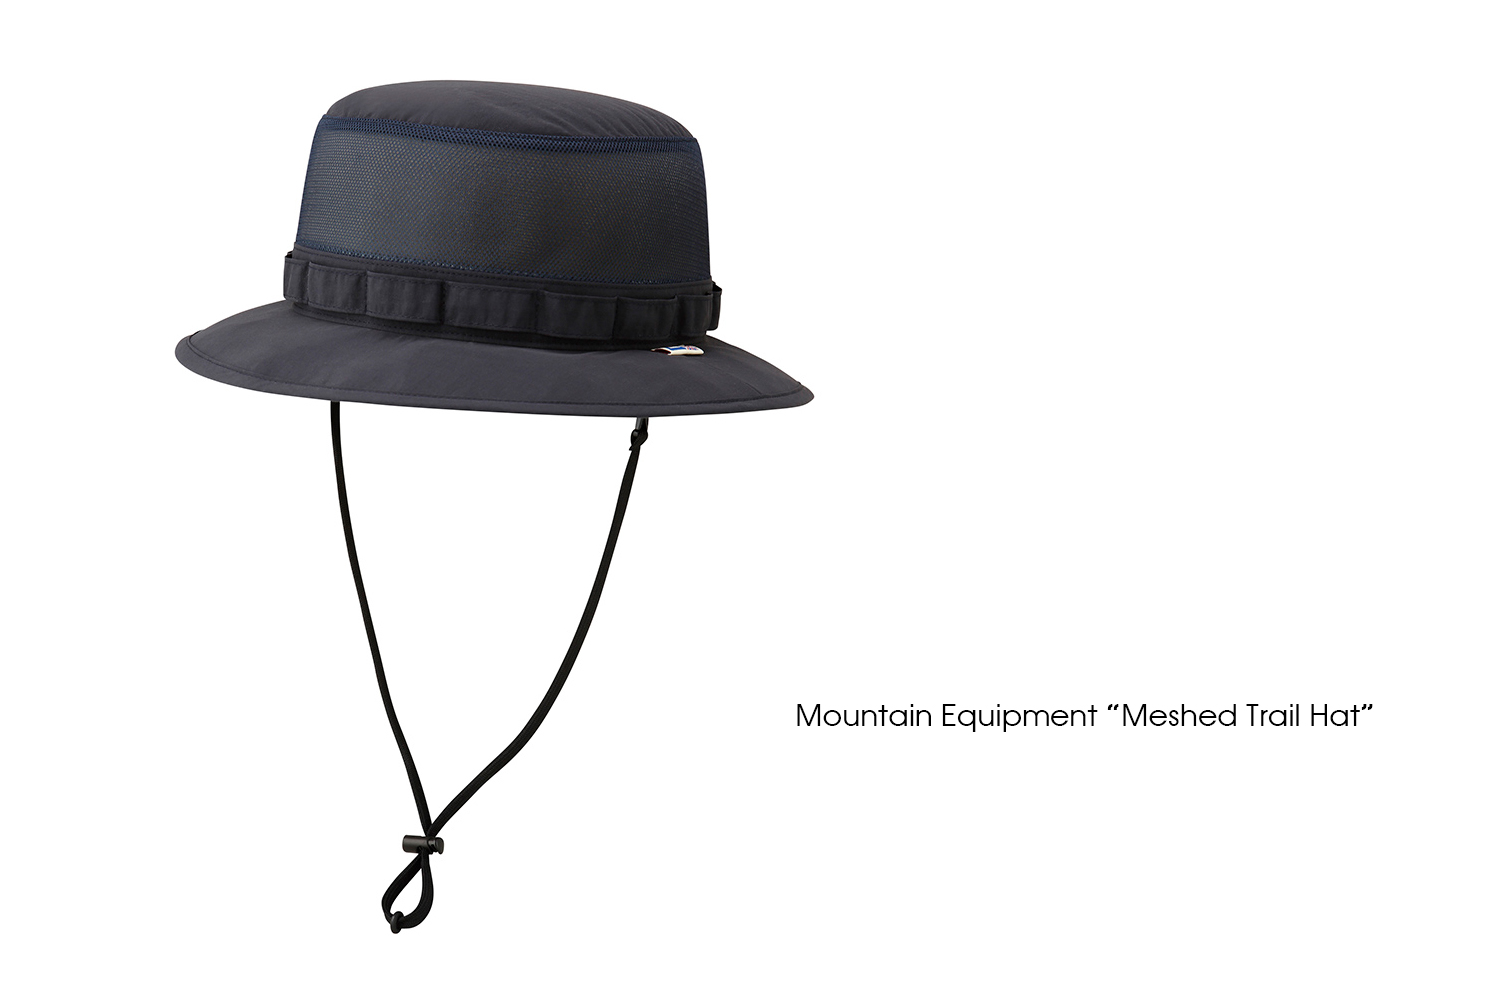 MOUNTAIN EQUIPMENT "Meshed Trail Hat"